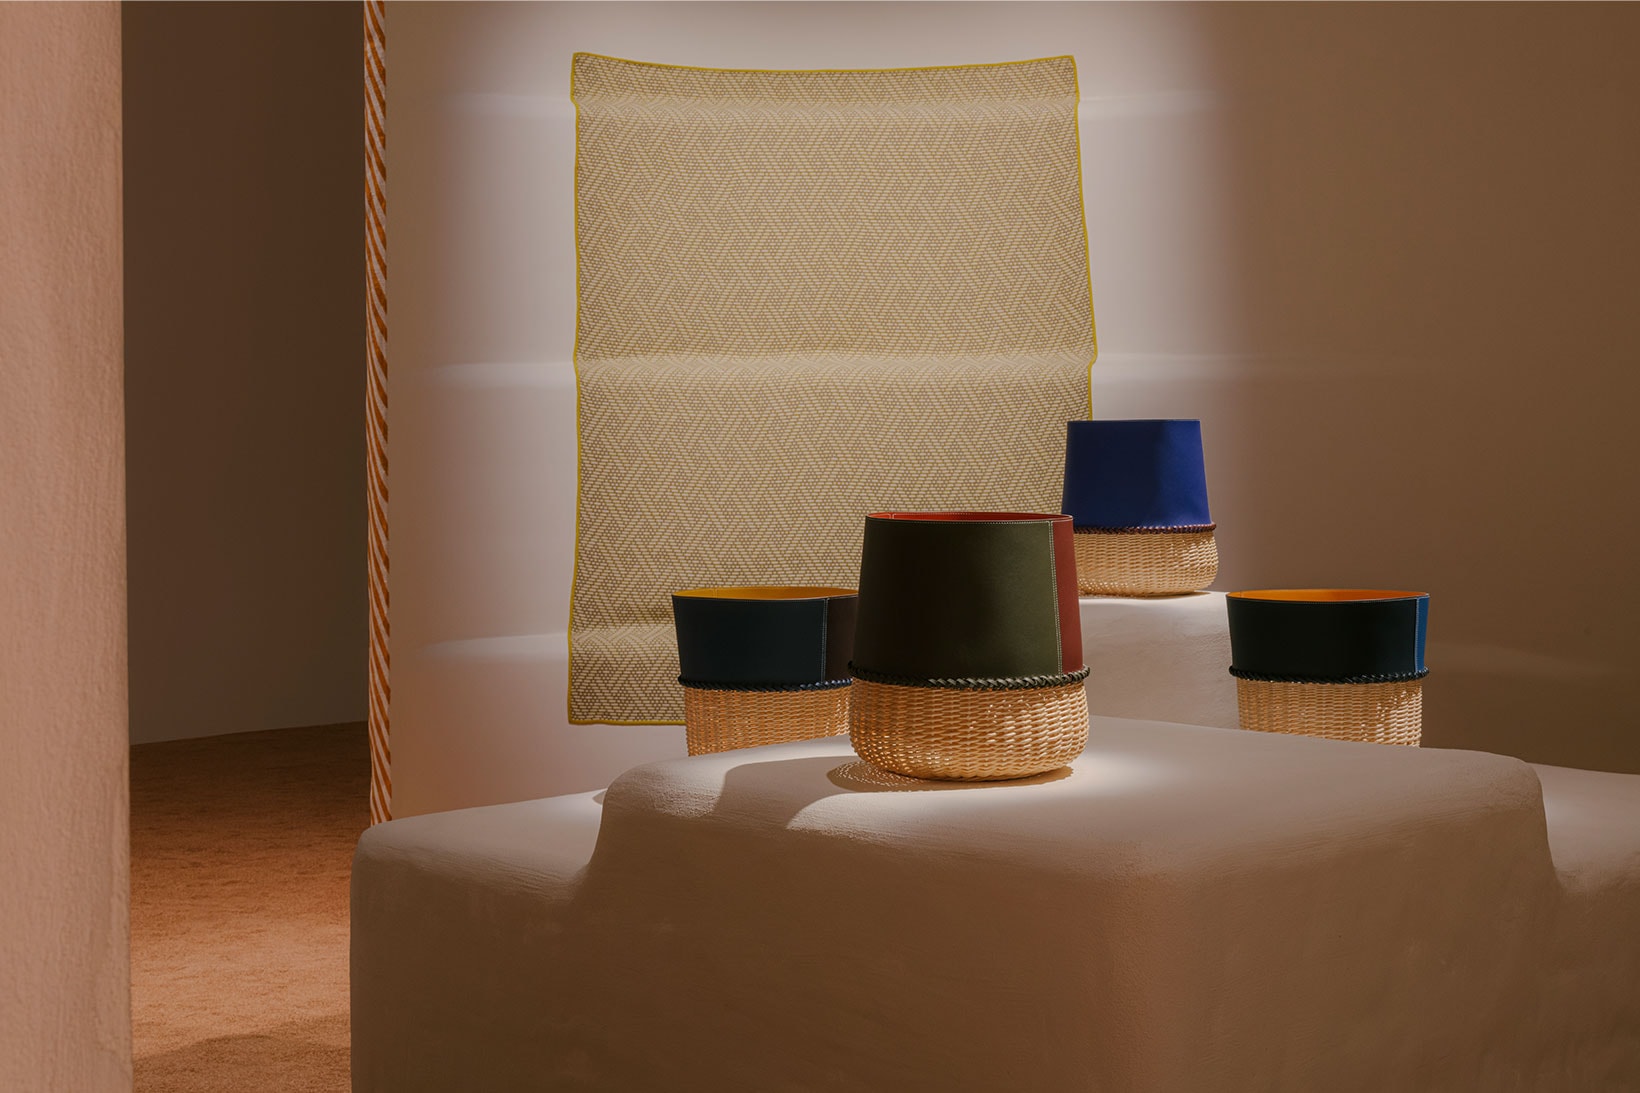 Hermés "Collection for the Home 2021-2022" baskets